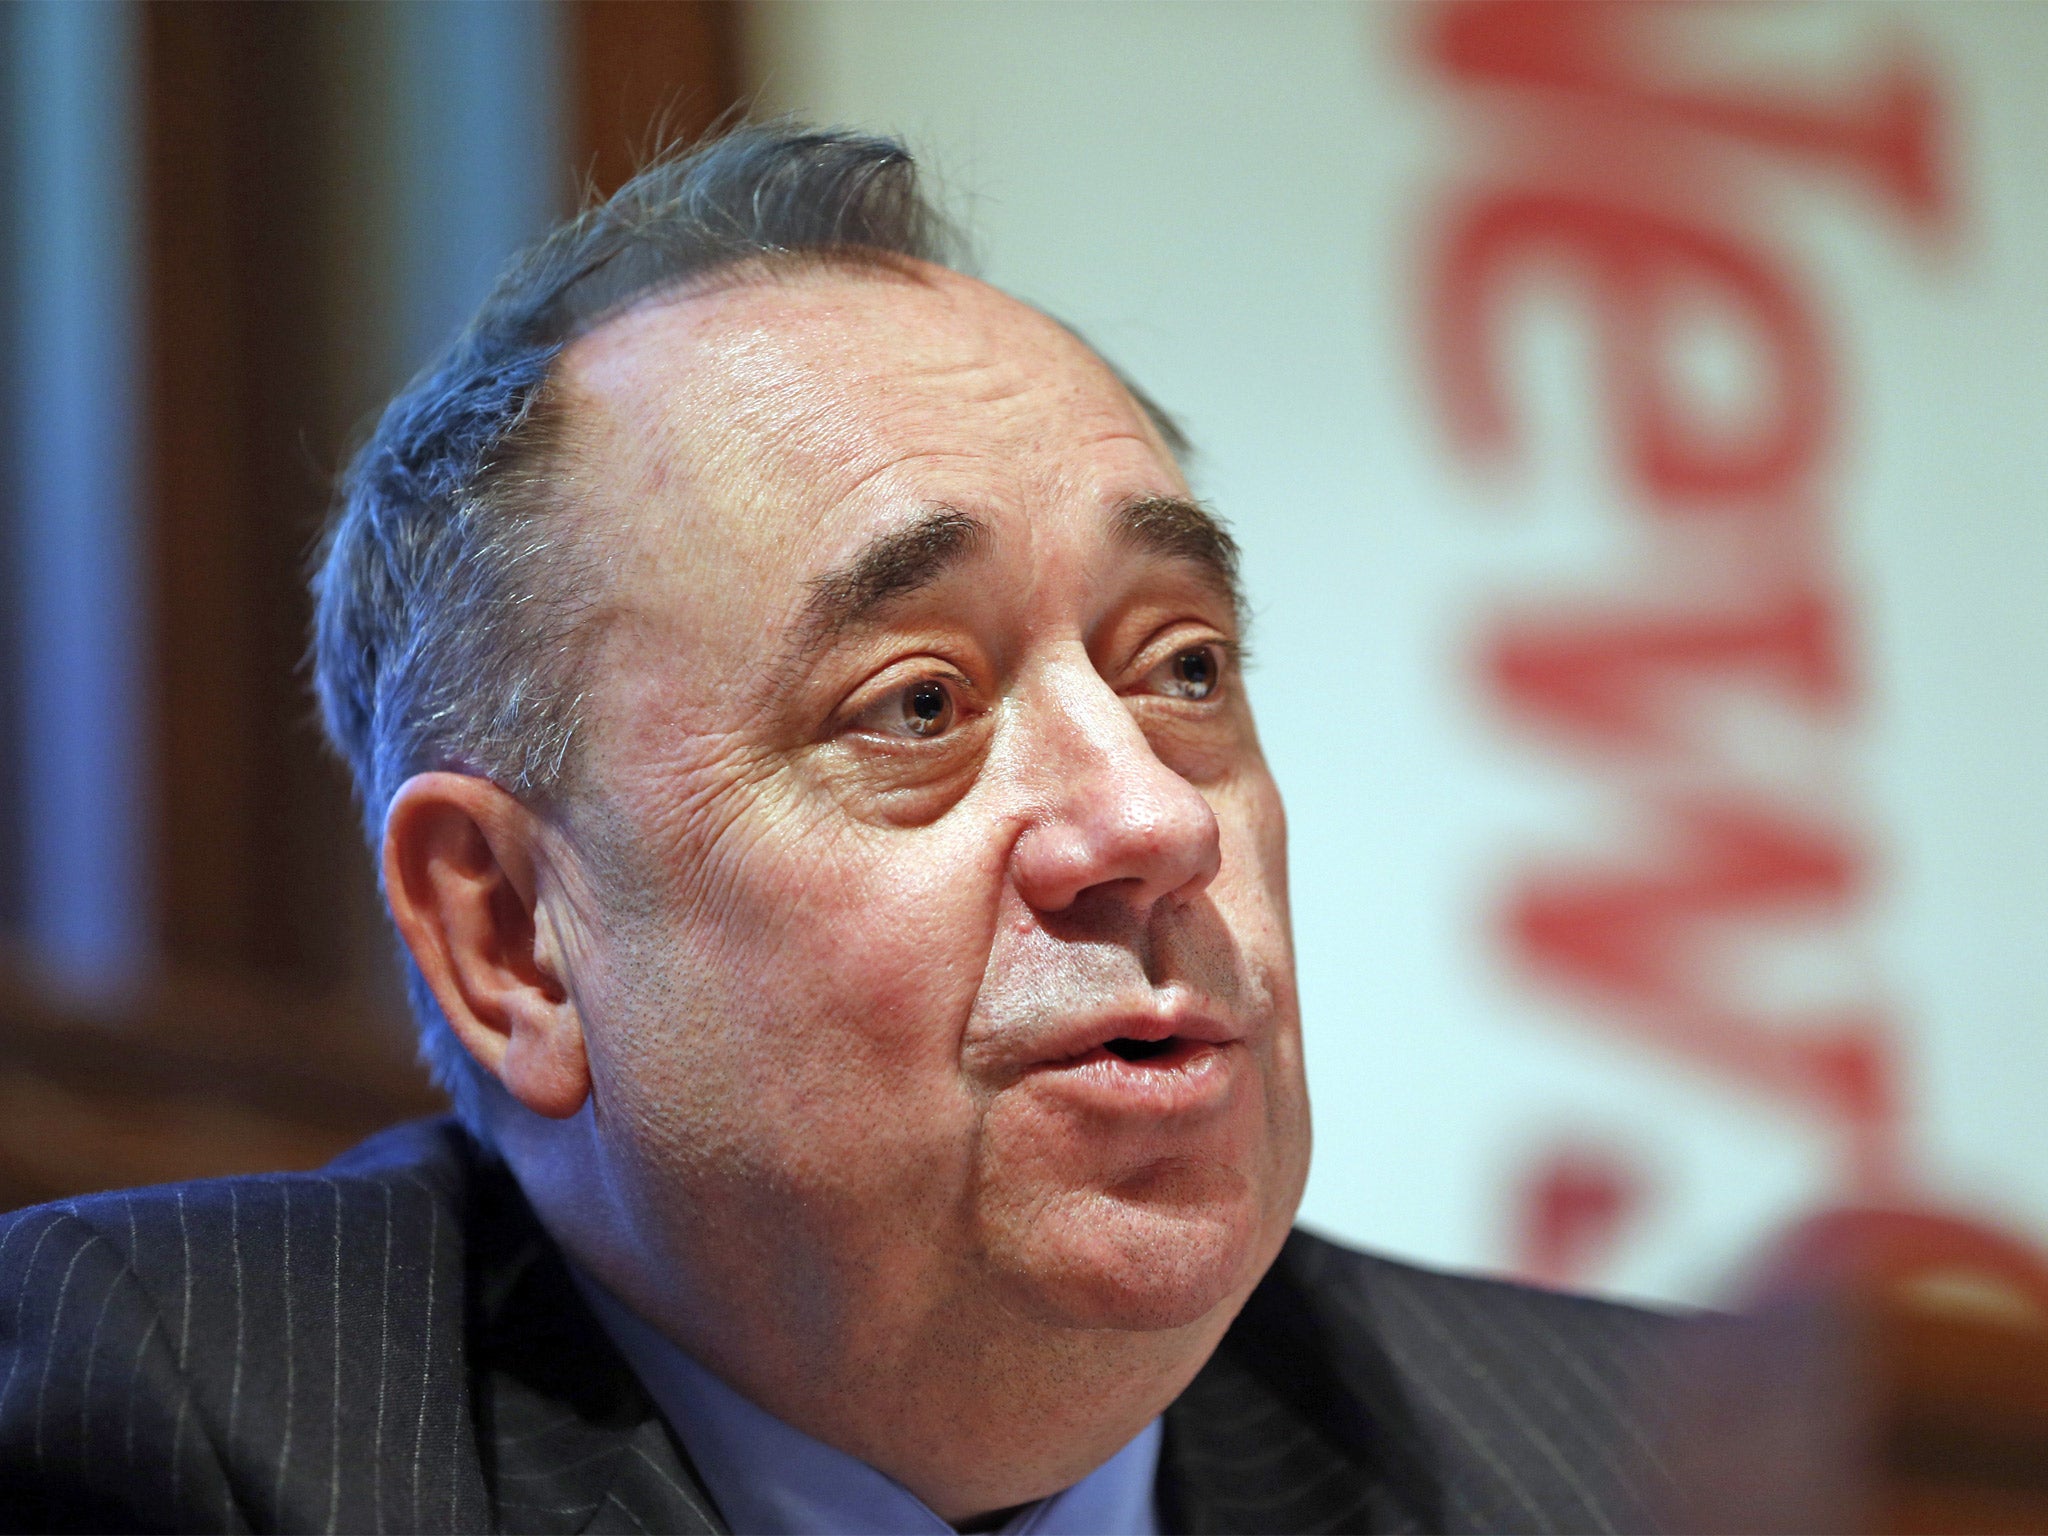 Scottish first Minister Alex Salmond delivers a lecture on Scottish independence in central London